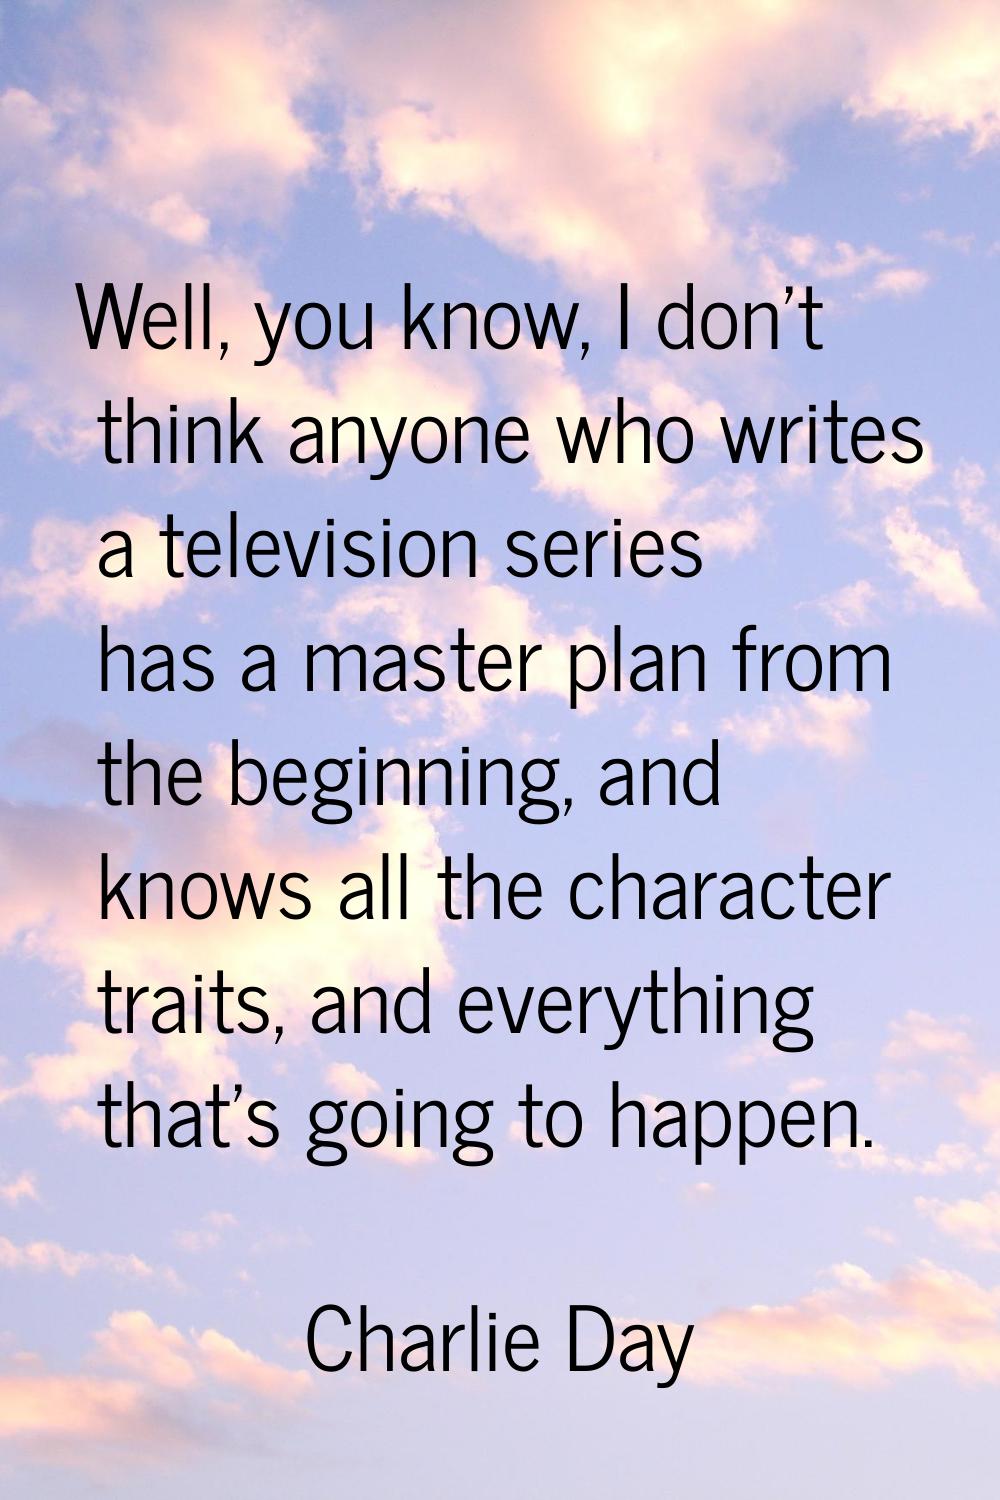 Well, you know, I don't think anyone who writes a television series has a master plan from the begi